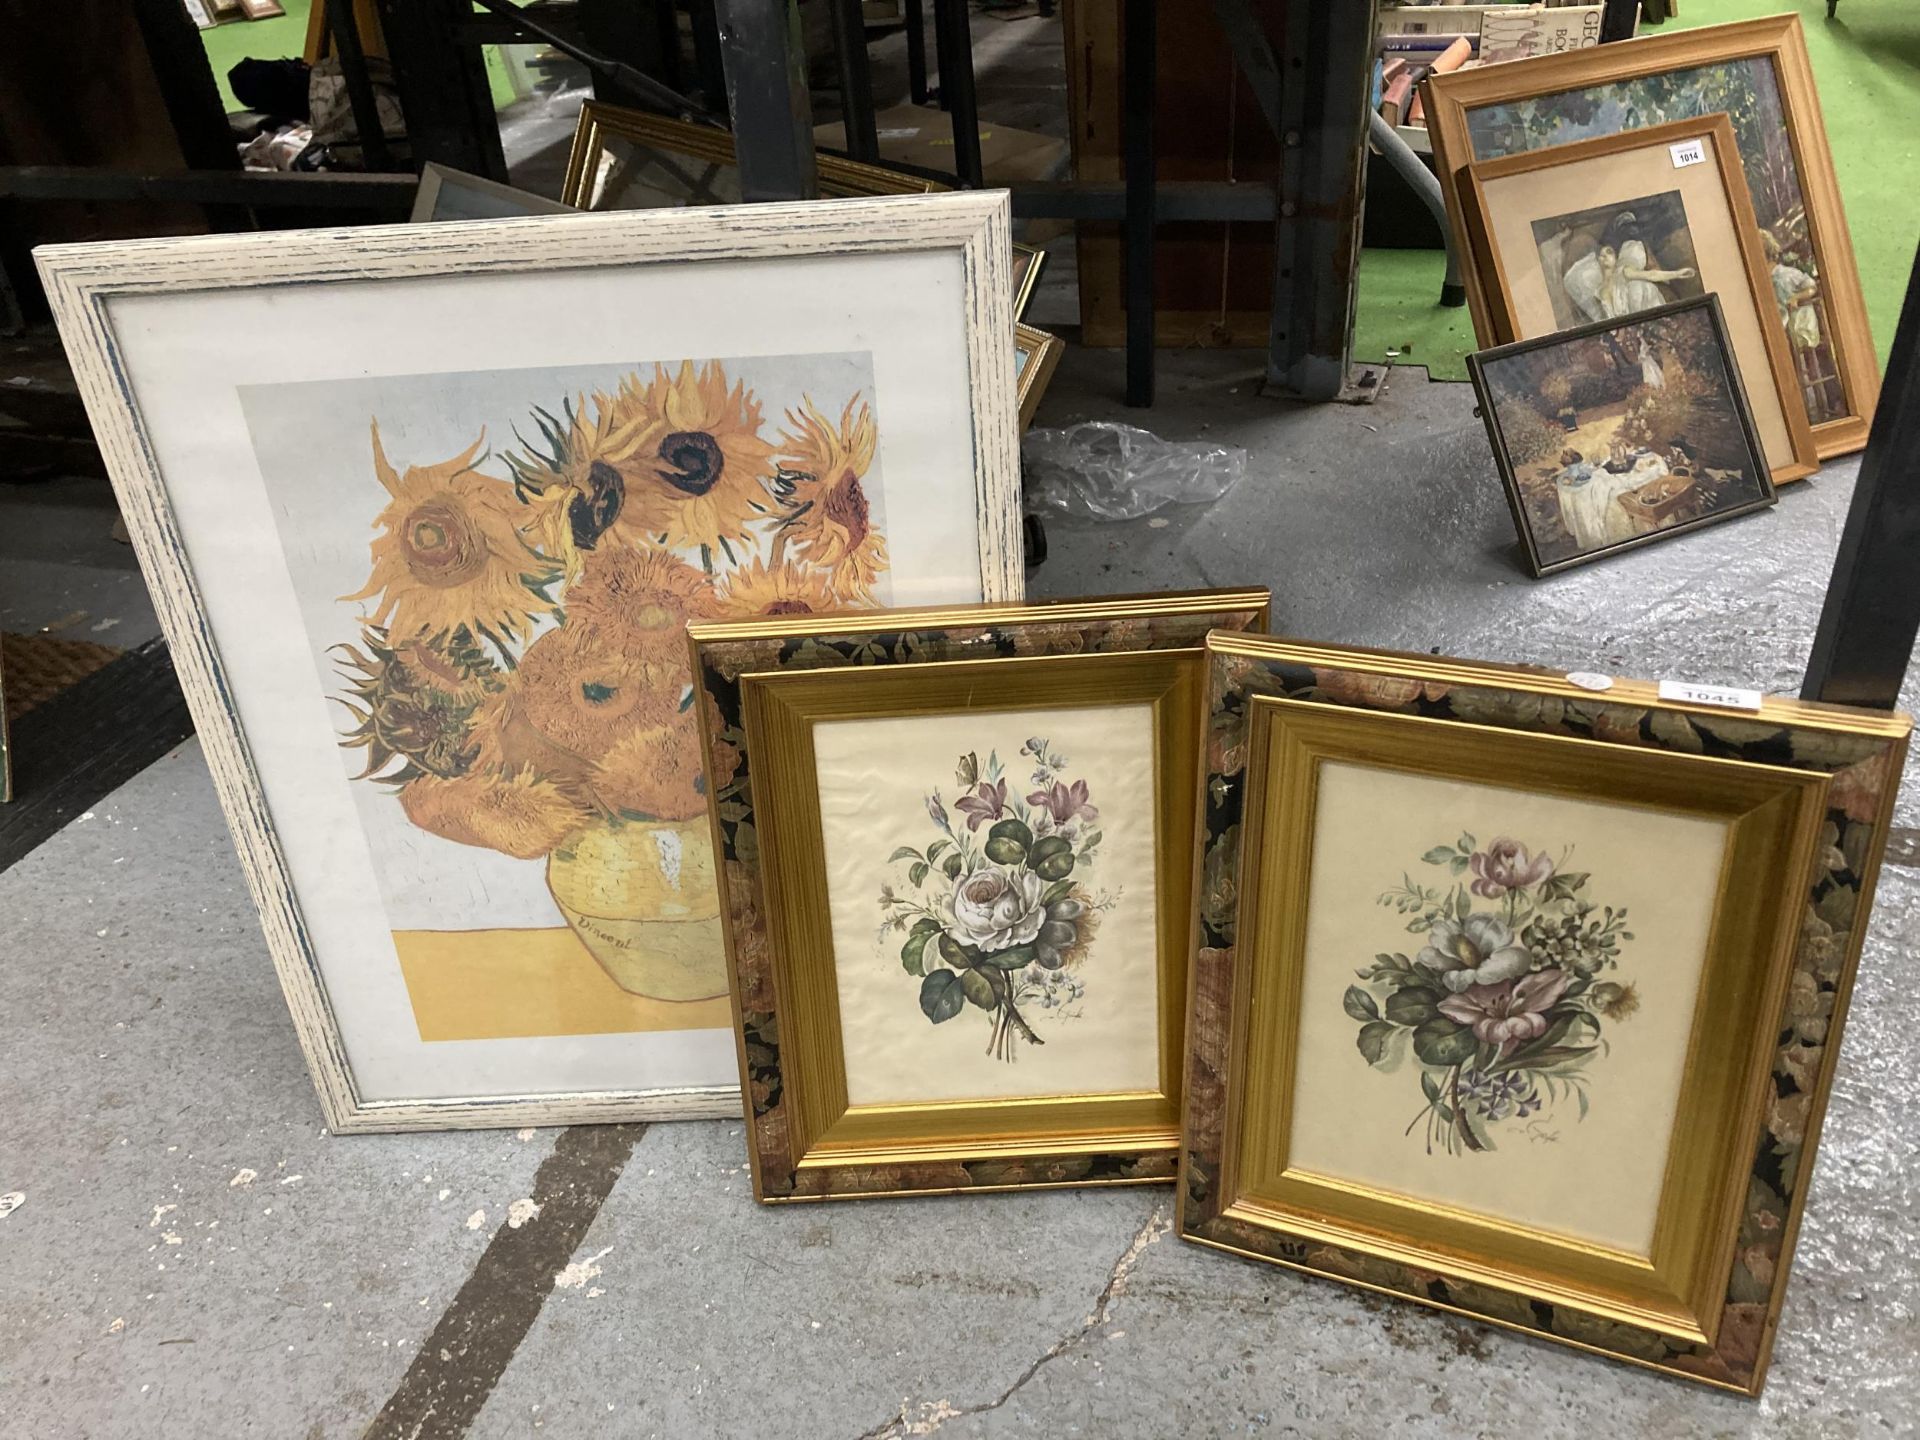 THREE FRAMED PRINTS - PAIR OF GILT FRAMED EXAMPLES AND A LARGER VAN GOGH SUNFLOWERS PRINT